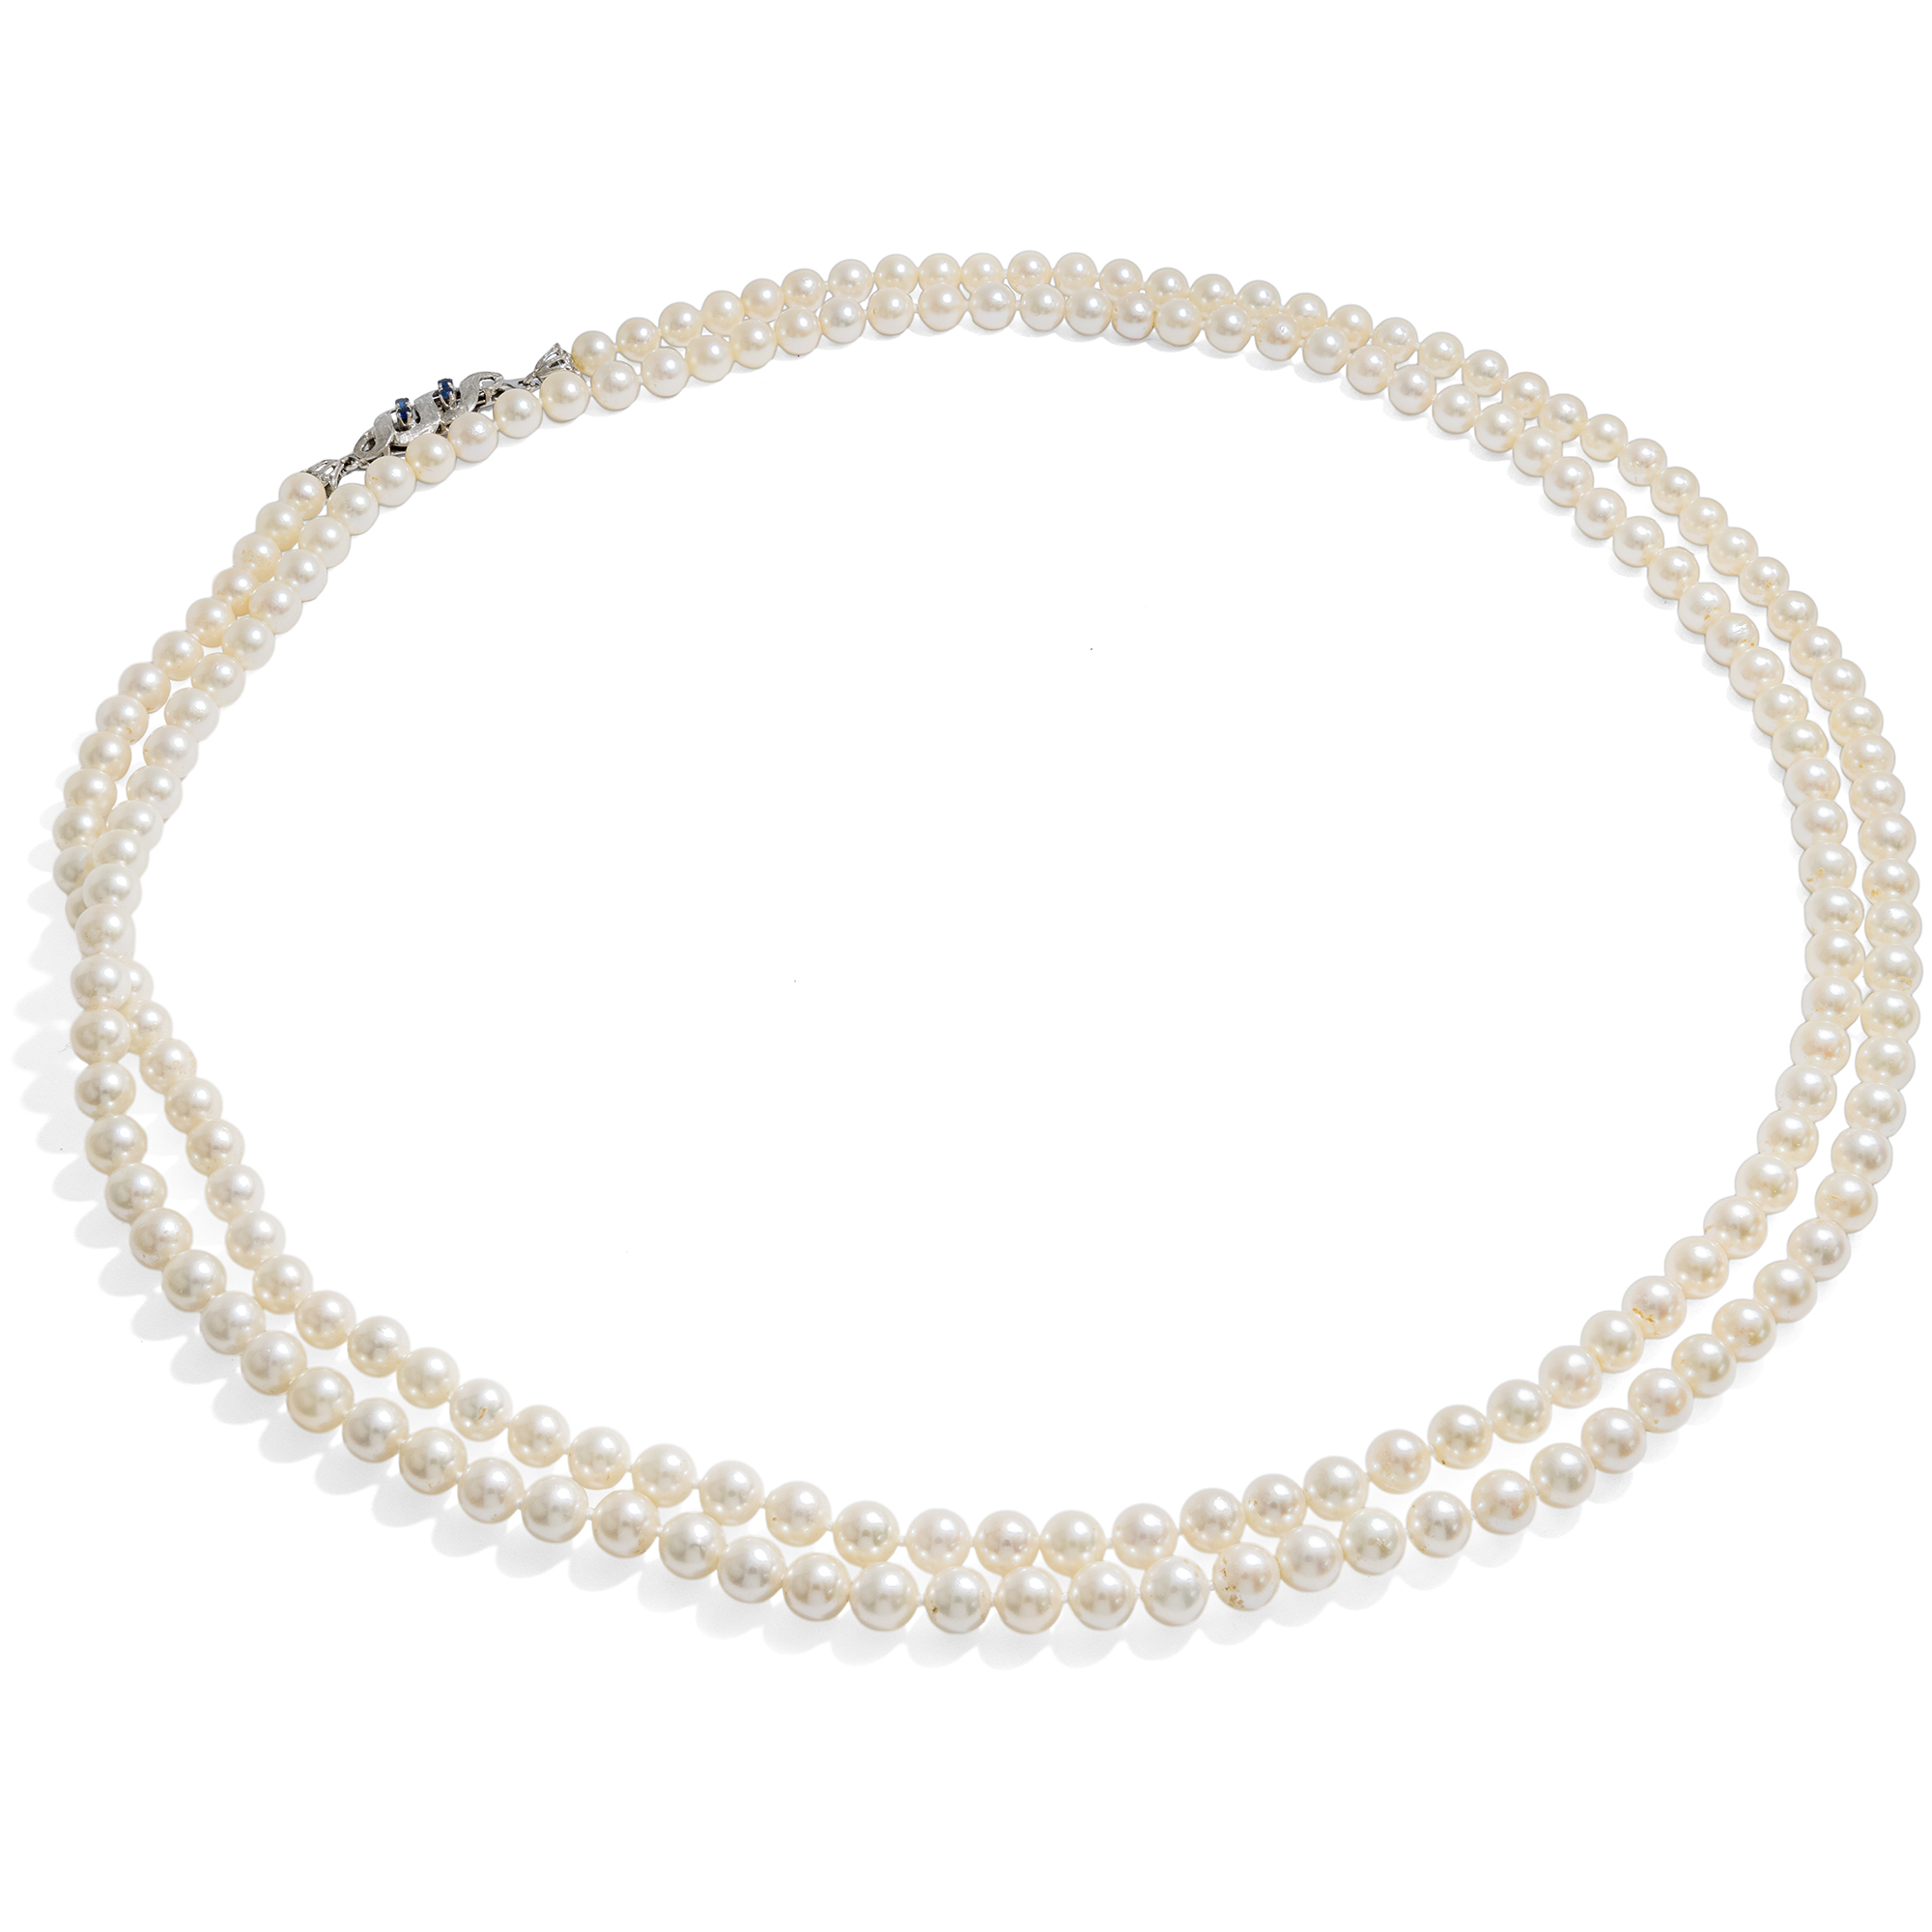 Long Sautoir Pearl Necklace with White Gold & Sapphire Clasp, c. 1970